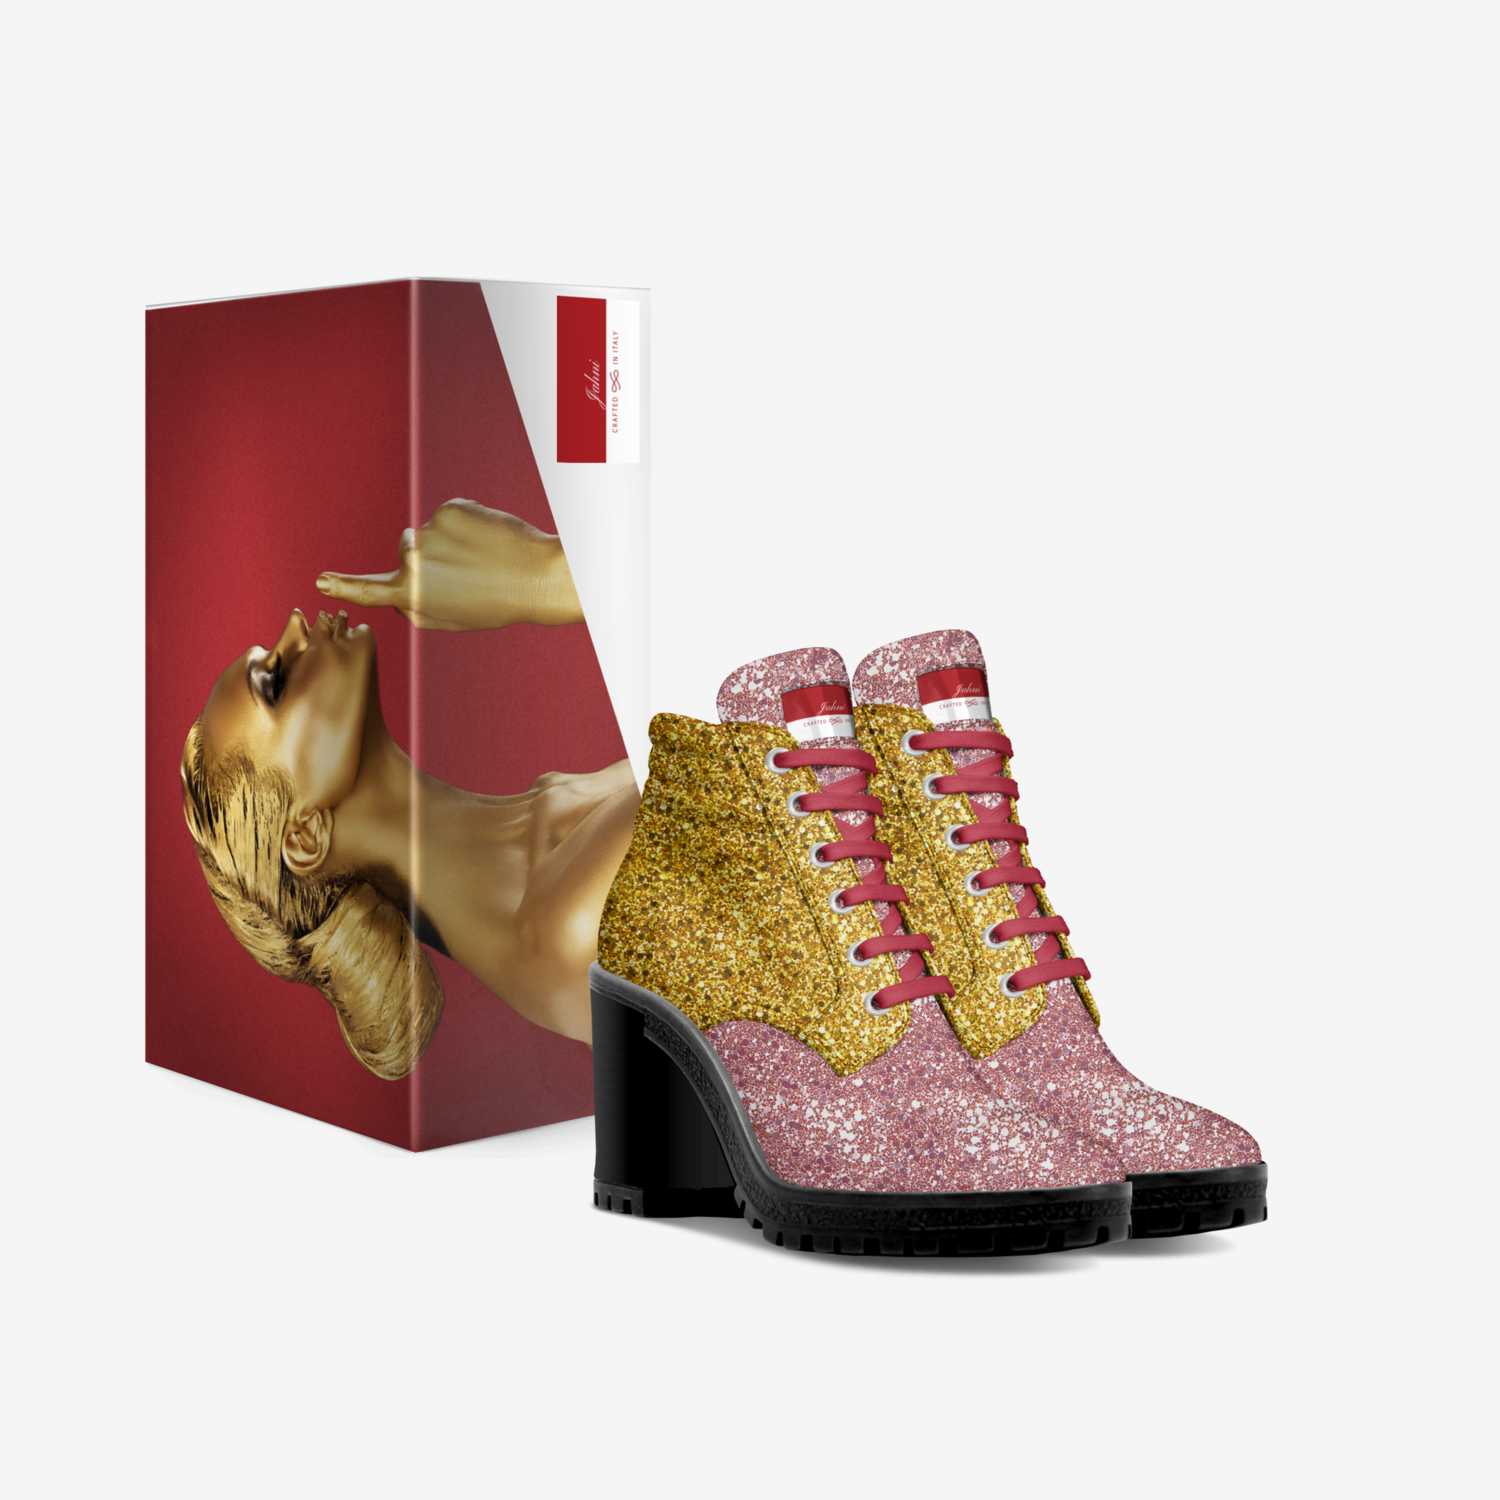 Jahni custom made in Italy shoes by Jahni Williams | Box view